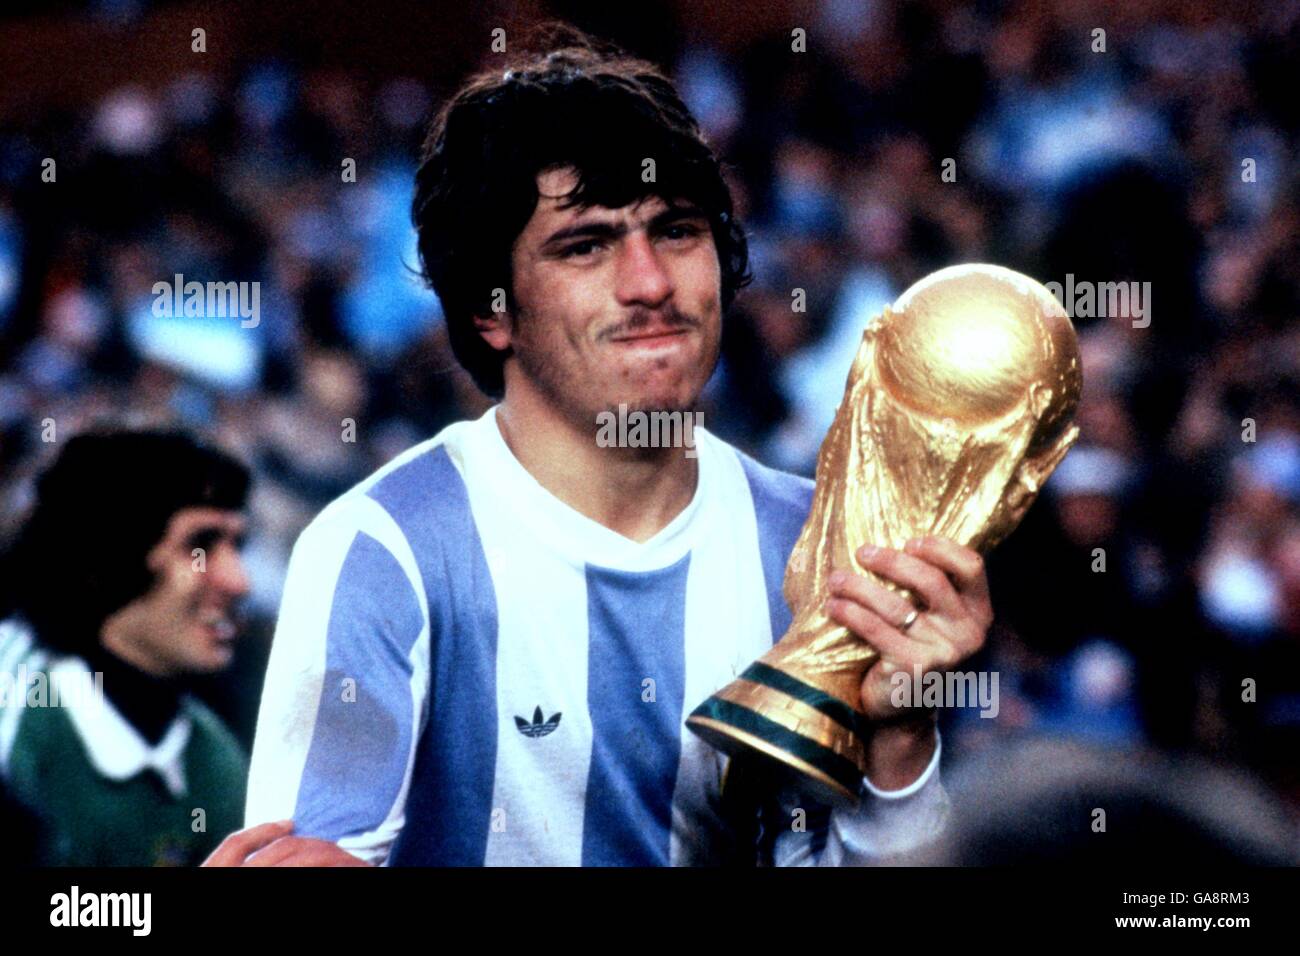 The Paperclip on X: On June 25, 1978, Argentina, led by an inspired Daniel  Passarella and dashing long-haired Mario Kempes, won the FIFA World Cup for  the first time defeating Holland in